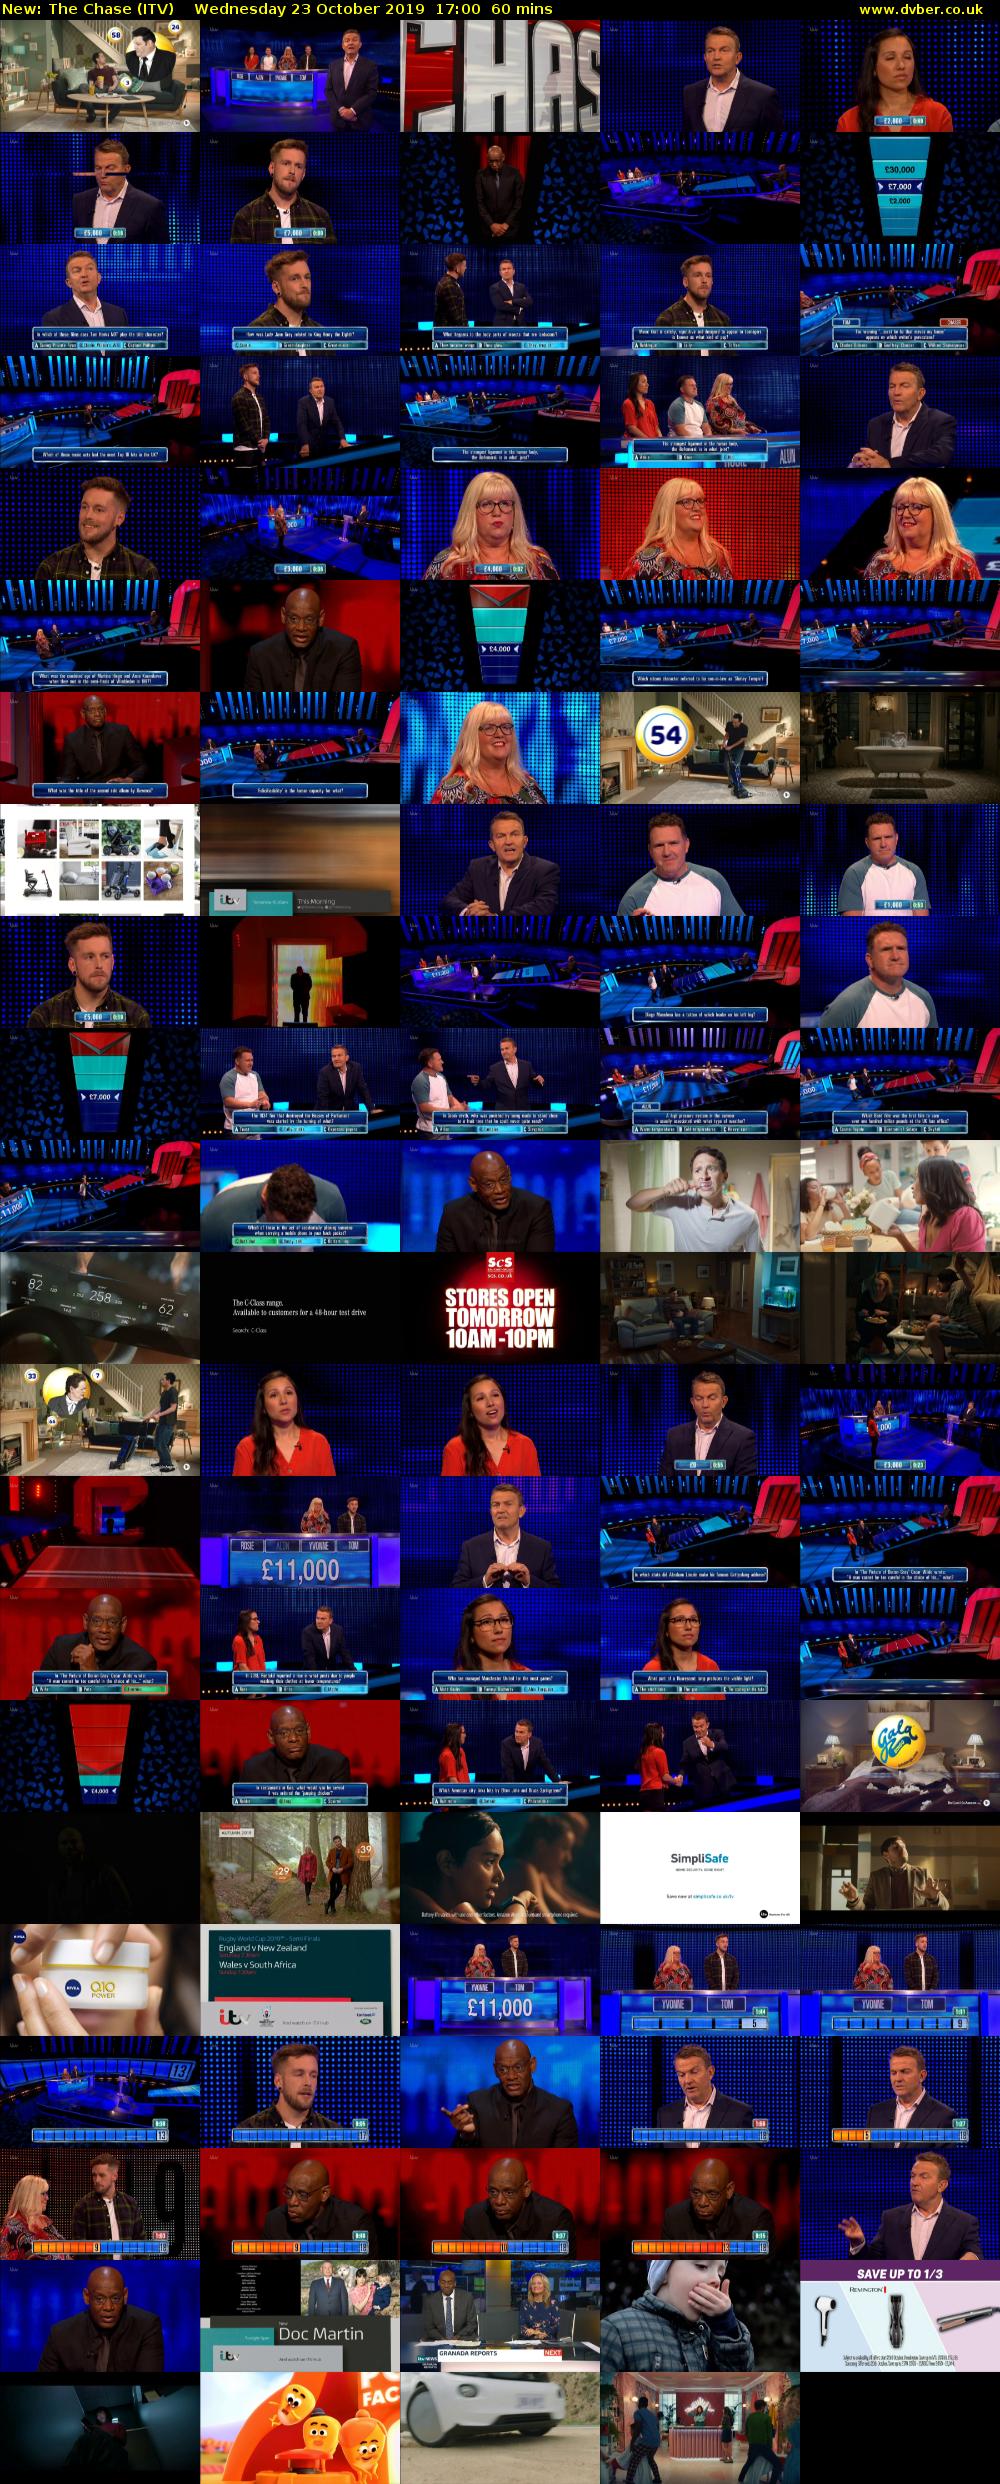 The Chase (ITV) Wednesday 23 October 2019 17:00 - 18:00